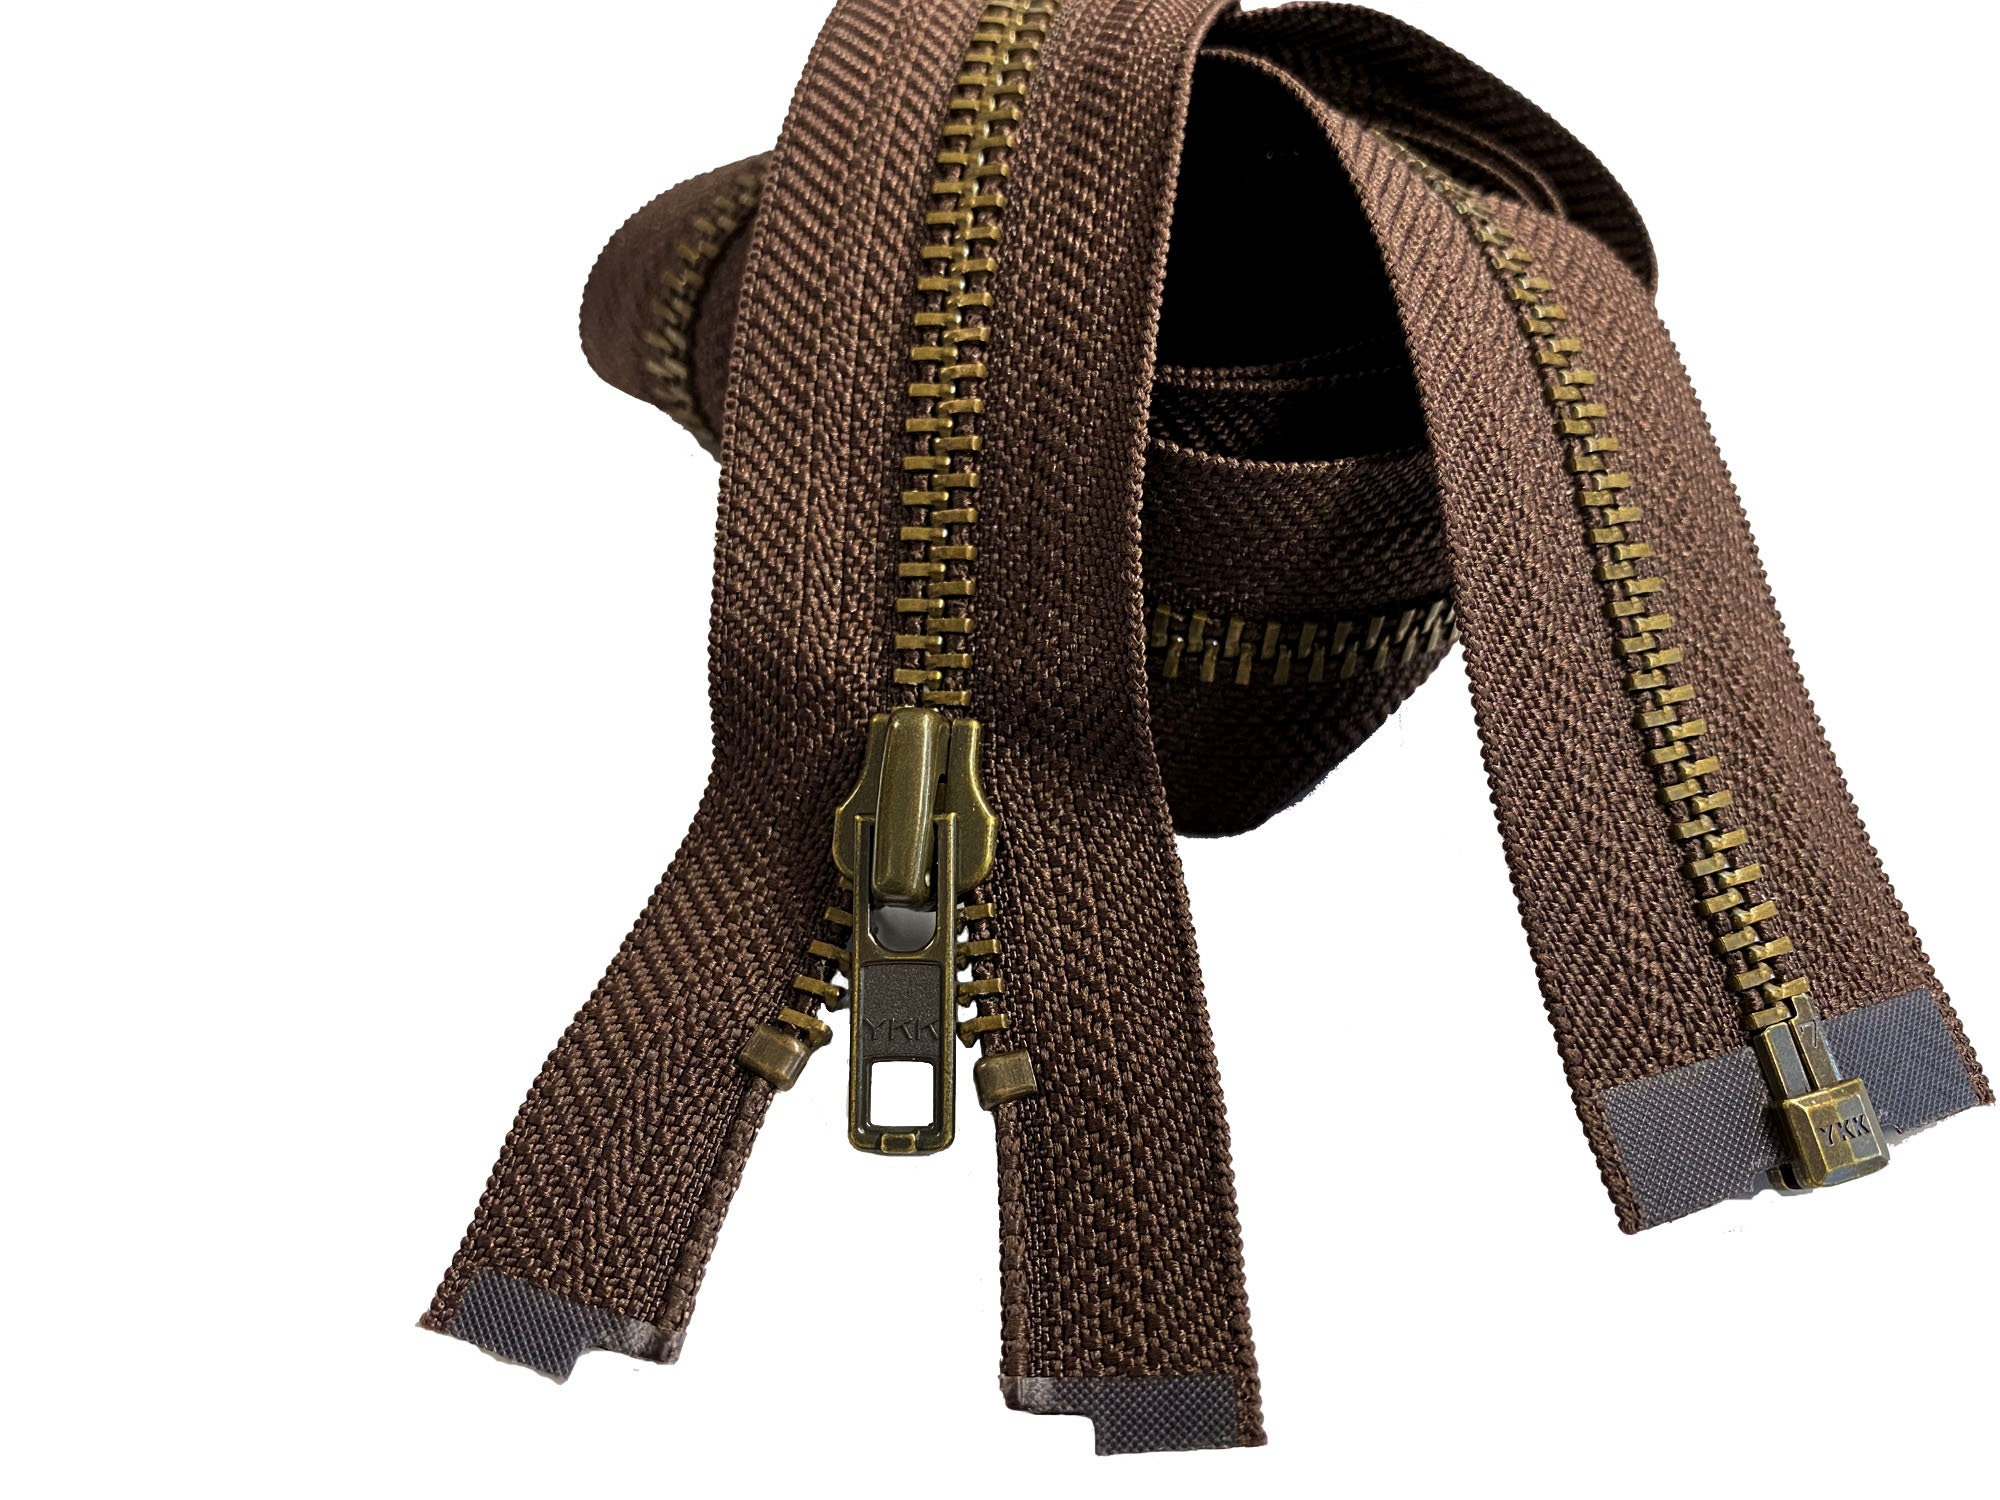  Zipperstop Wholesale YKK- Extra Heavy Duty Jacket Zipper YKK  #10 Brass- Metal Teeth Separating -Chaps Zippers for Crafter's Special  Color Navy #560 Made in USA -Custom Length (10 inches)